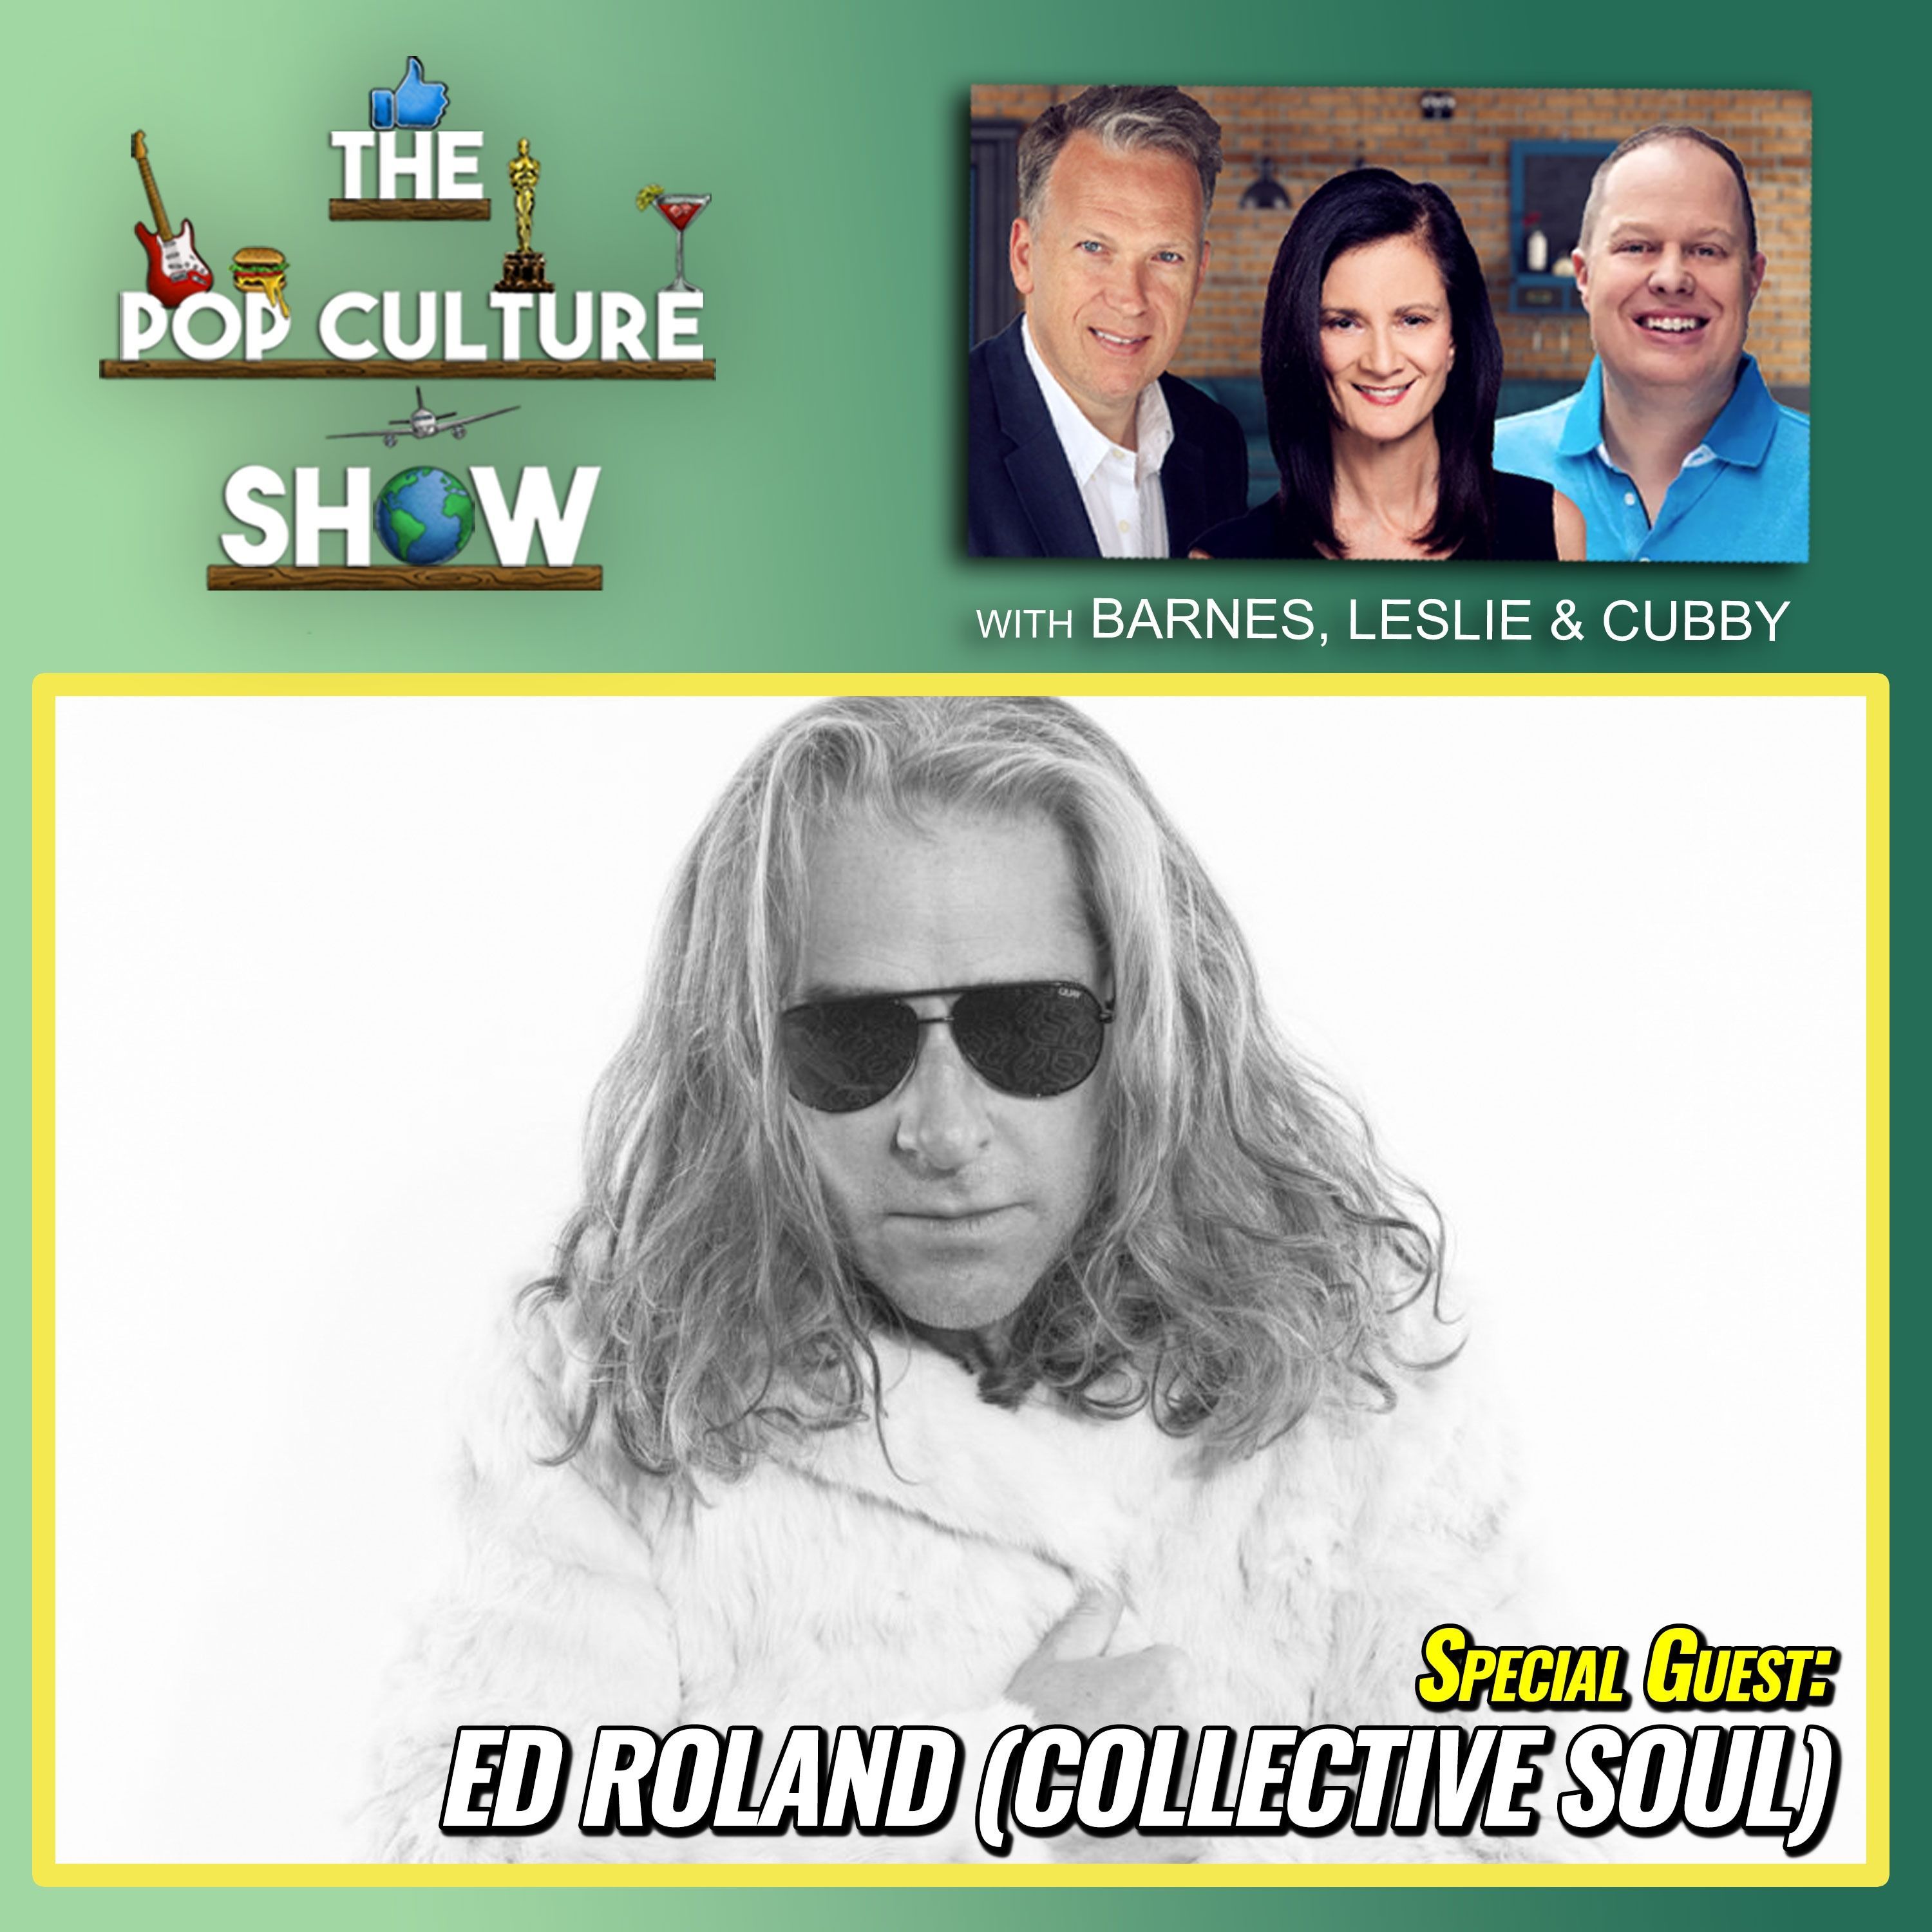 Collective Soul (Ed Roland Interview and Co-hosting) Image